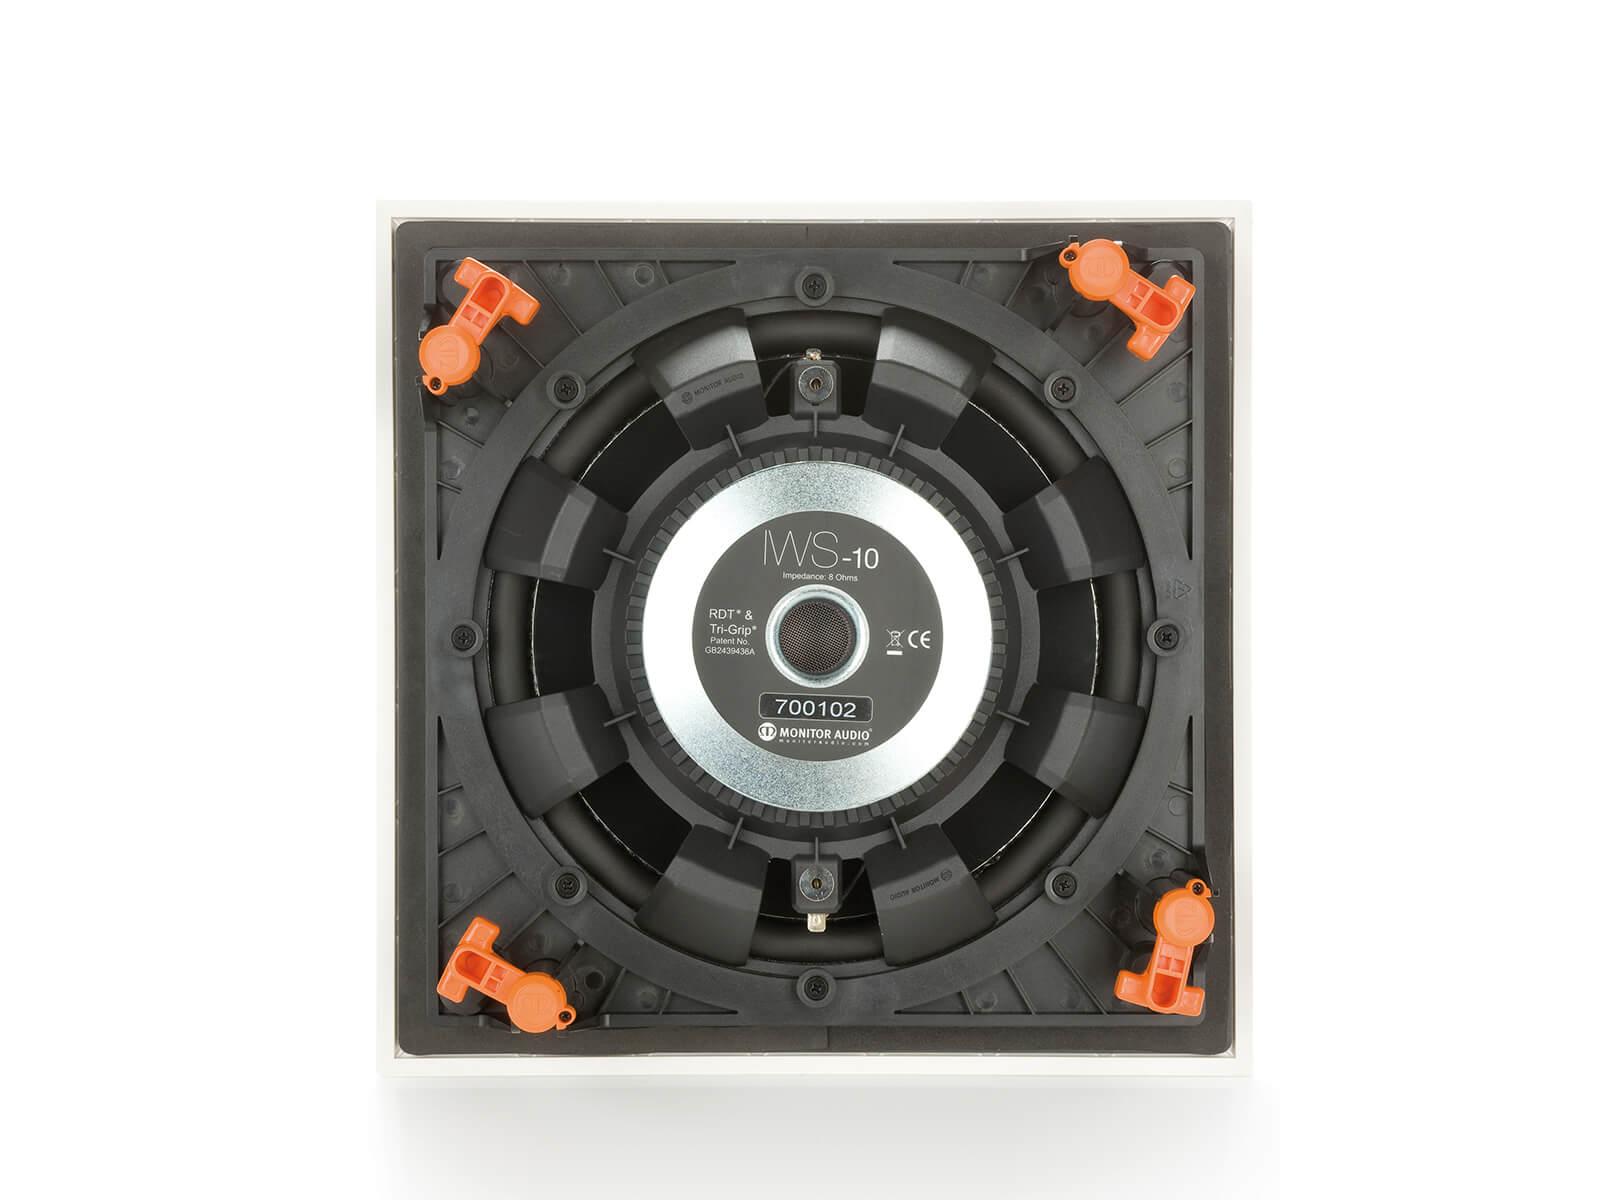 IWS-10 subwoofer, rear view.